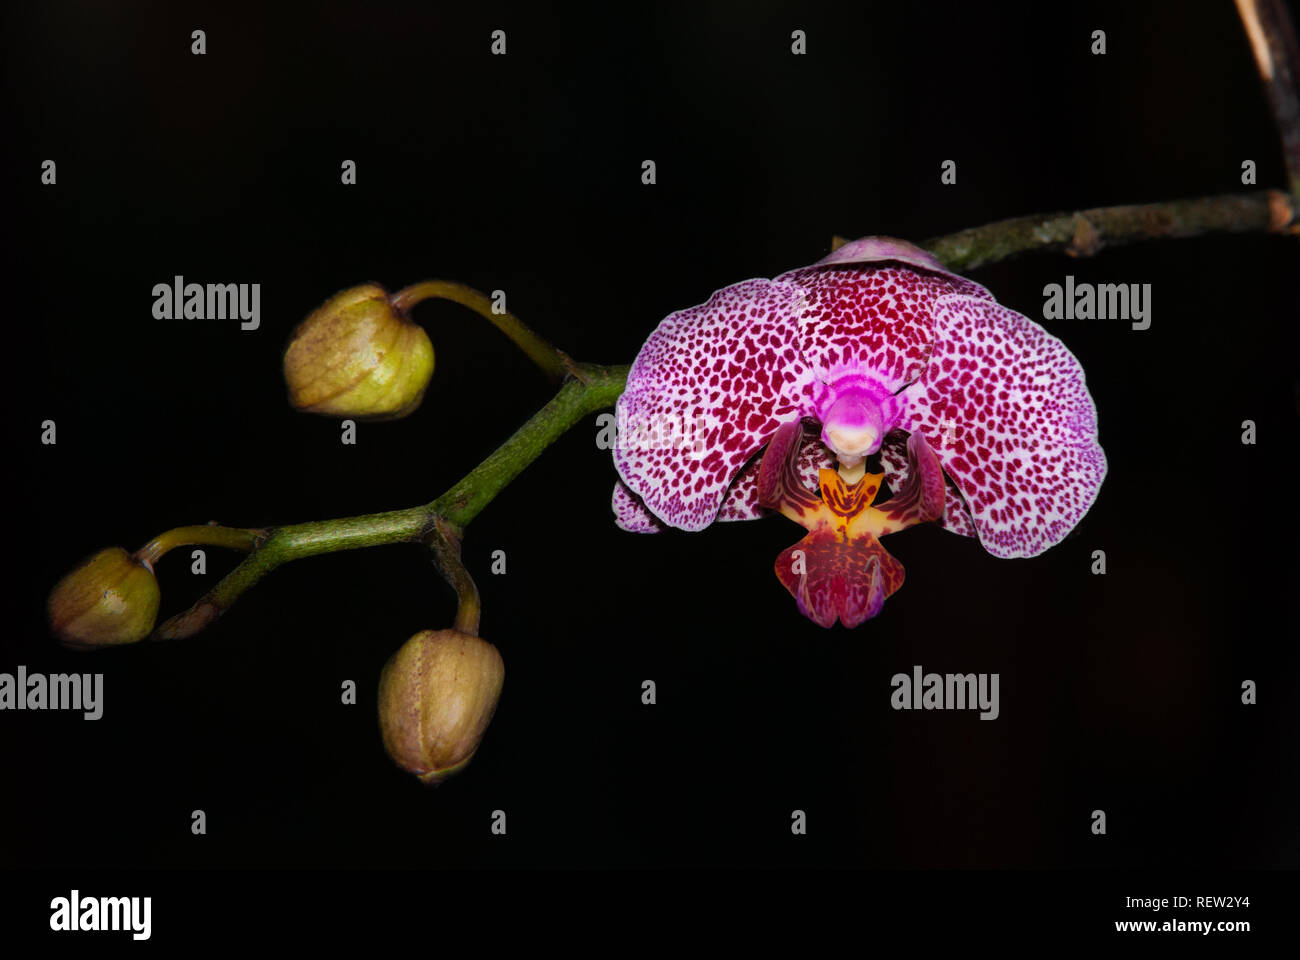 Portrait of a small purple orchid flower, tied to the branch with other flowers that have not yet bloomed Stock Photo